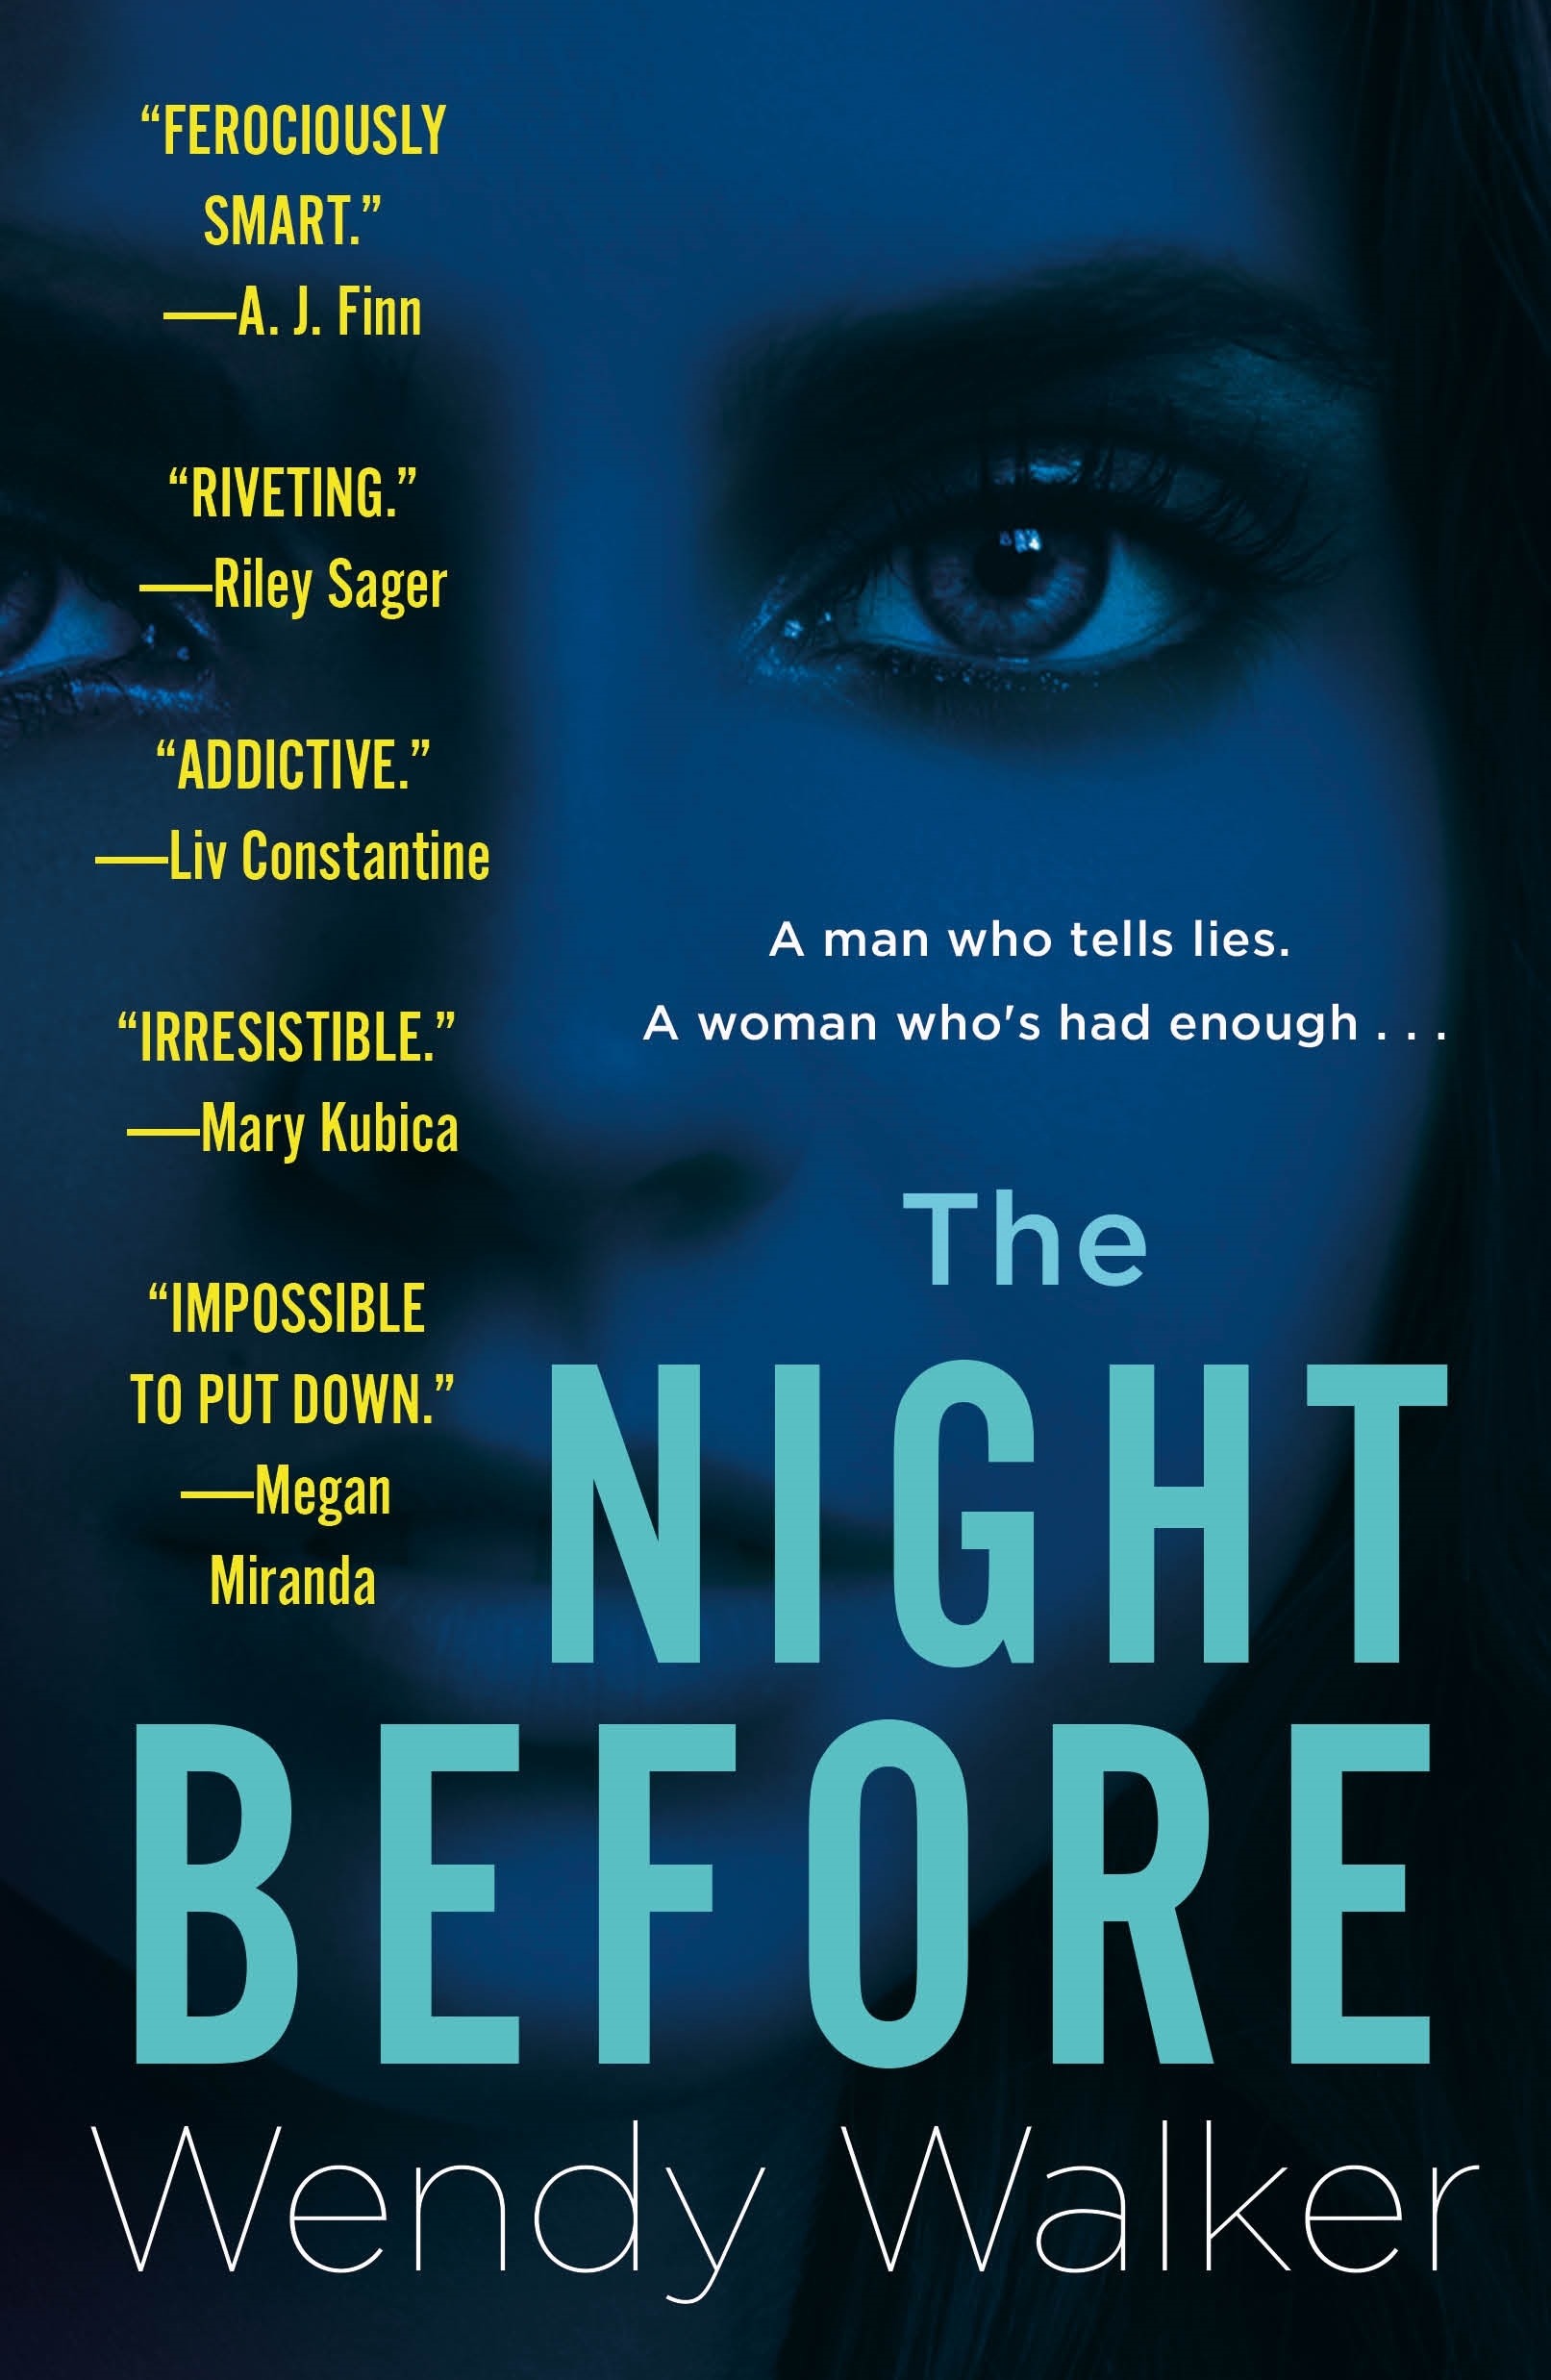 Book “The Night Before” by Wendy Walker